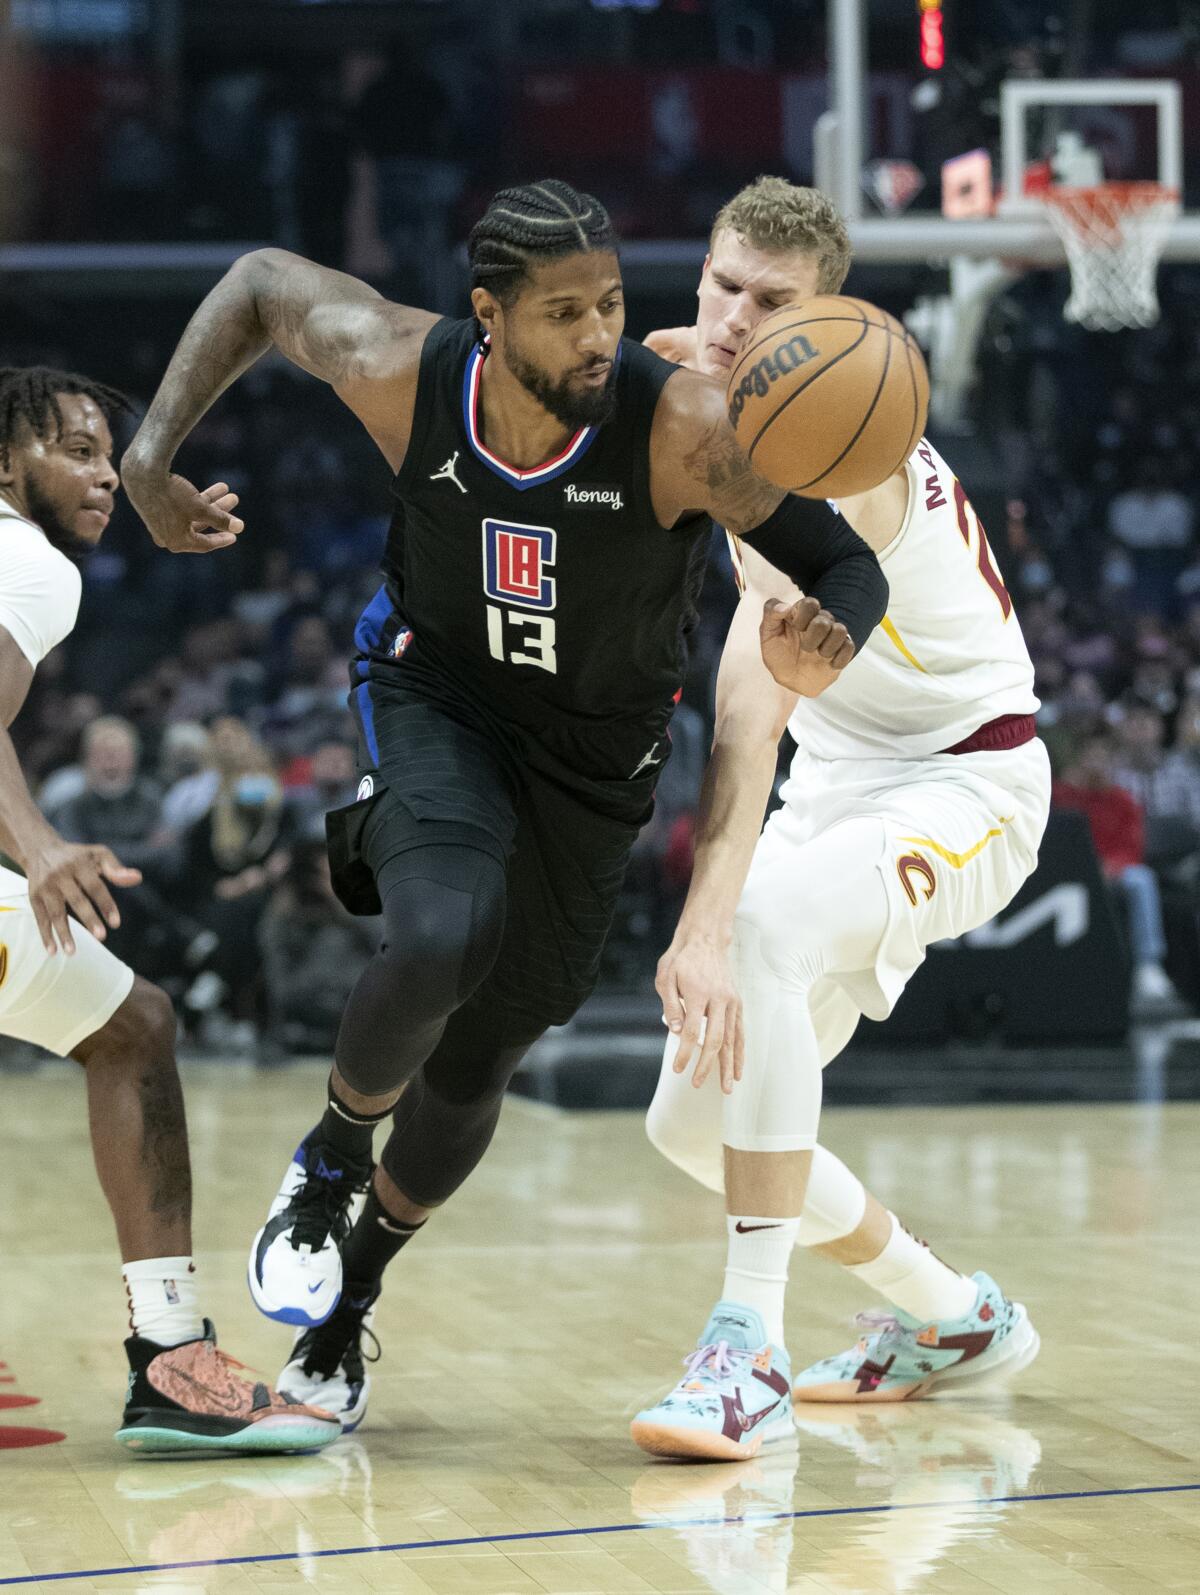 Clippers guard Paul George drives to the basket past Cleveland Cavaliers guard Darius Garland and forward Lauri Markkanen.